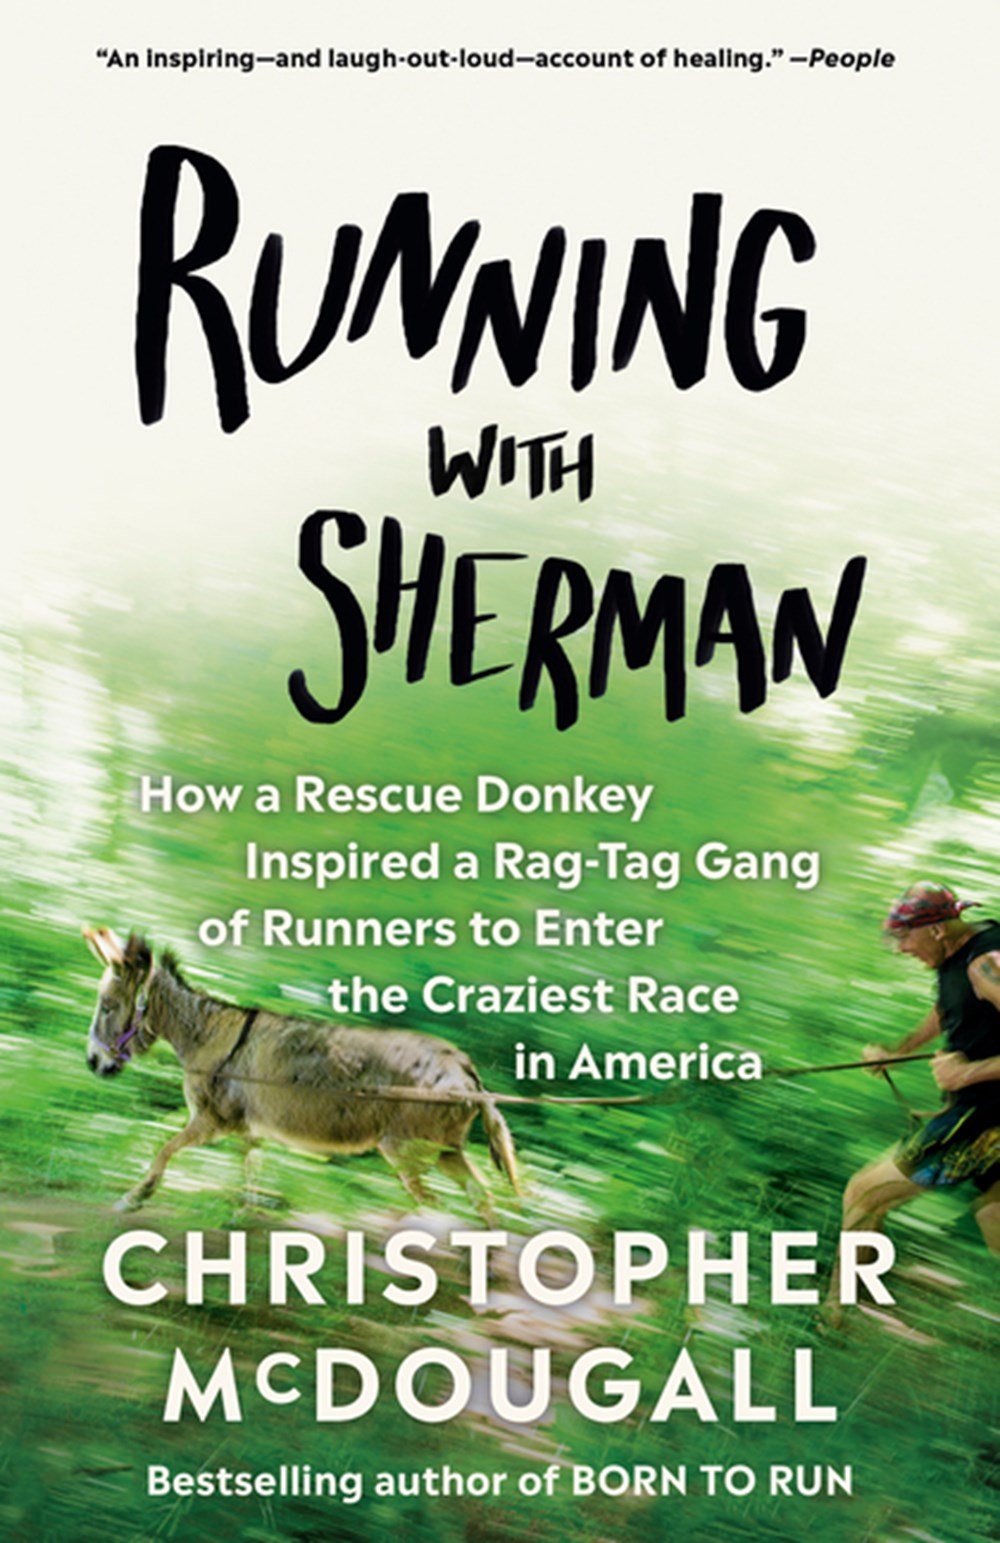 Running with Sherman: How a Rescue Donkey Inspired a Rag-Tag Gang of Runners to Enter the Craziest R